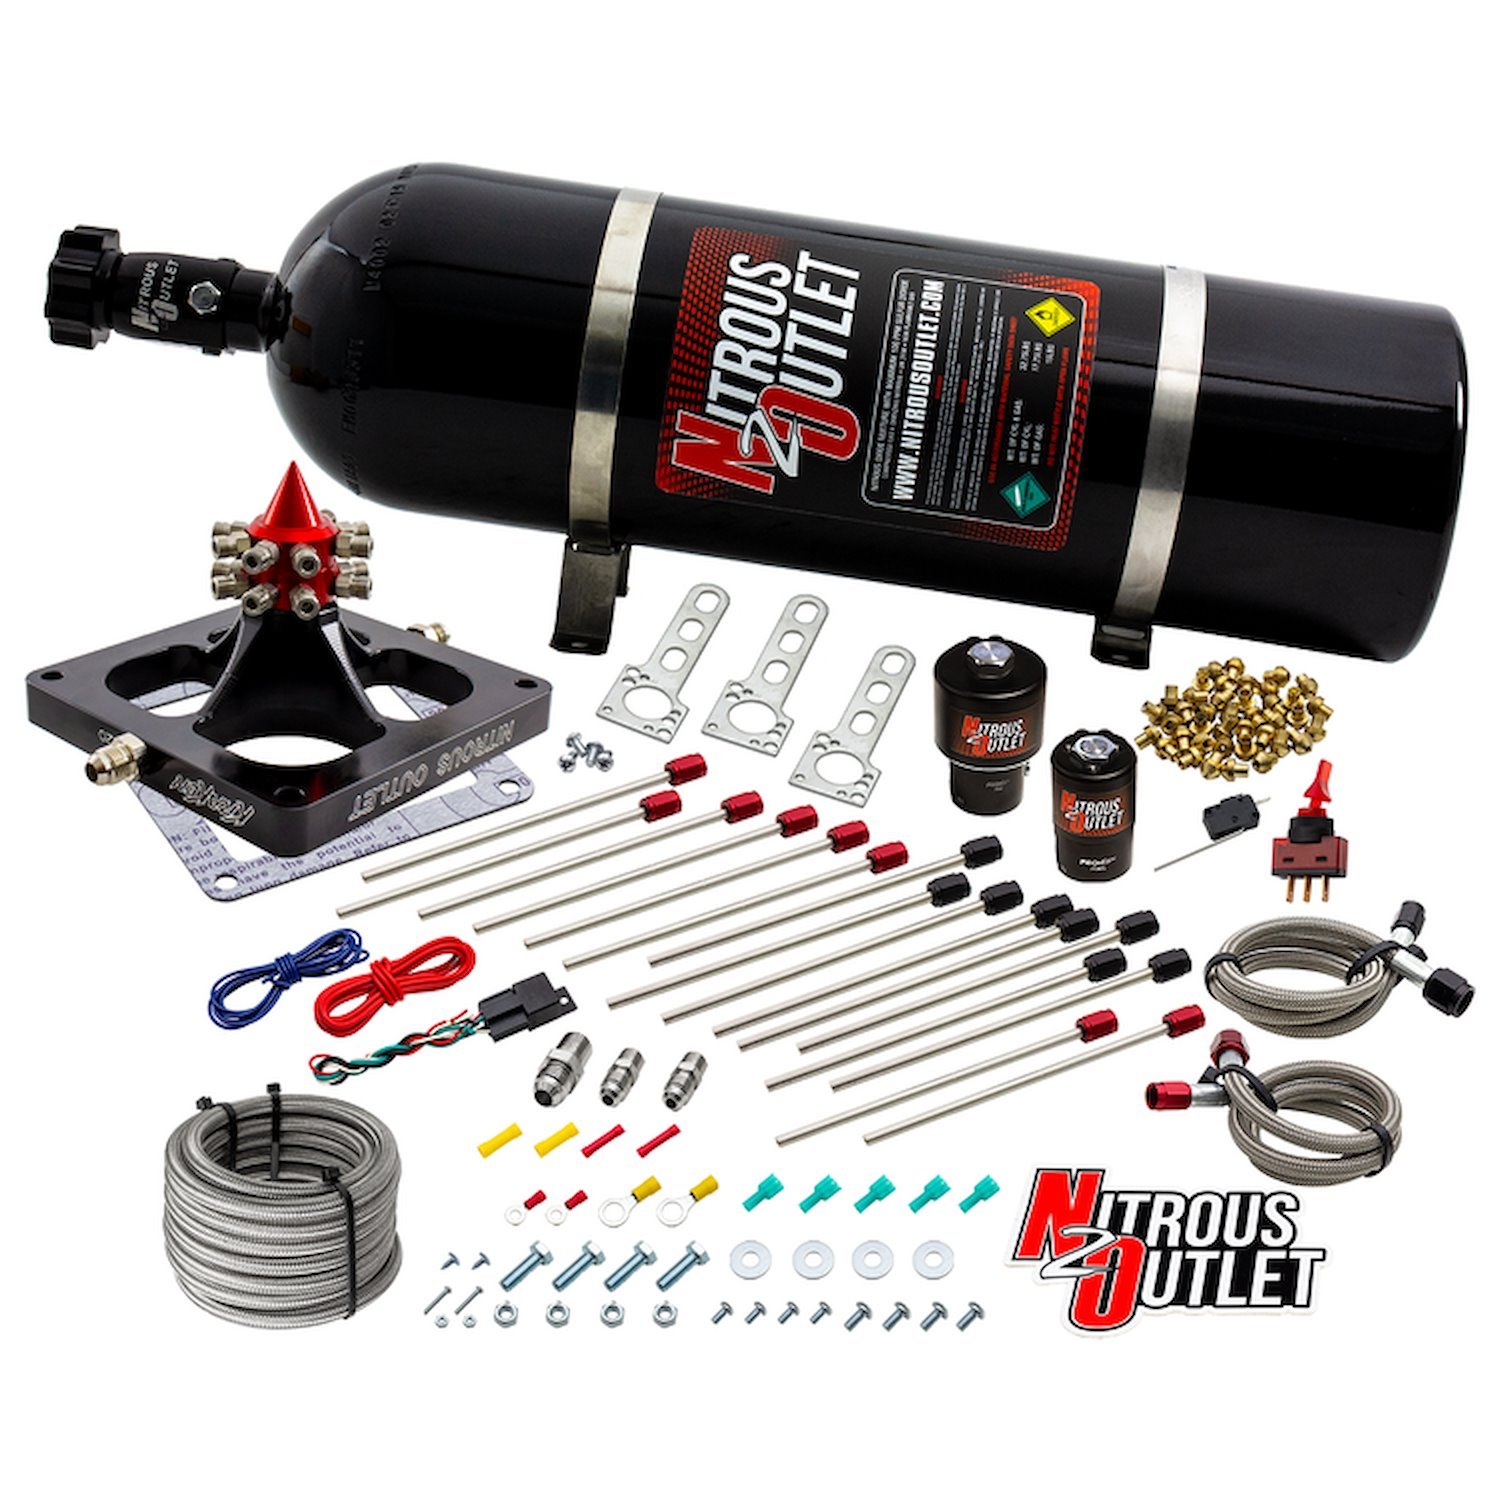 00-459001CS-15 4500 Kraken Competition System, Braided Hose/.189 Competition Trashcan Nitrous Solenoid/.310 Fuel Solenoid